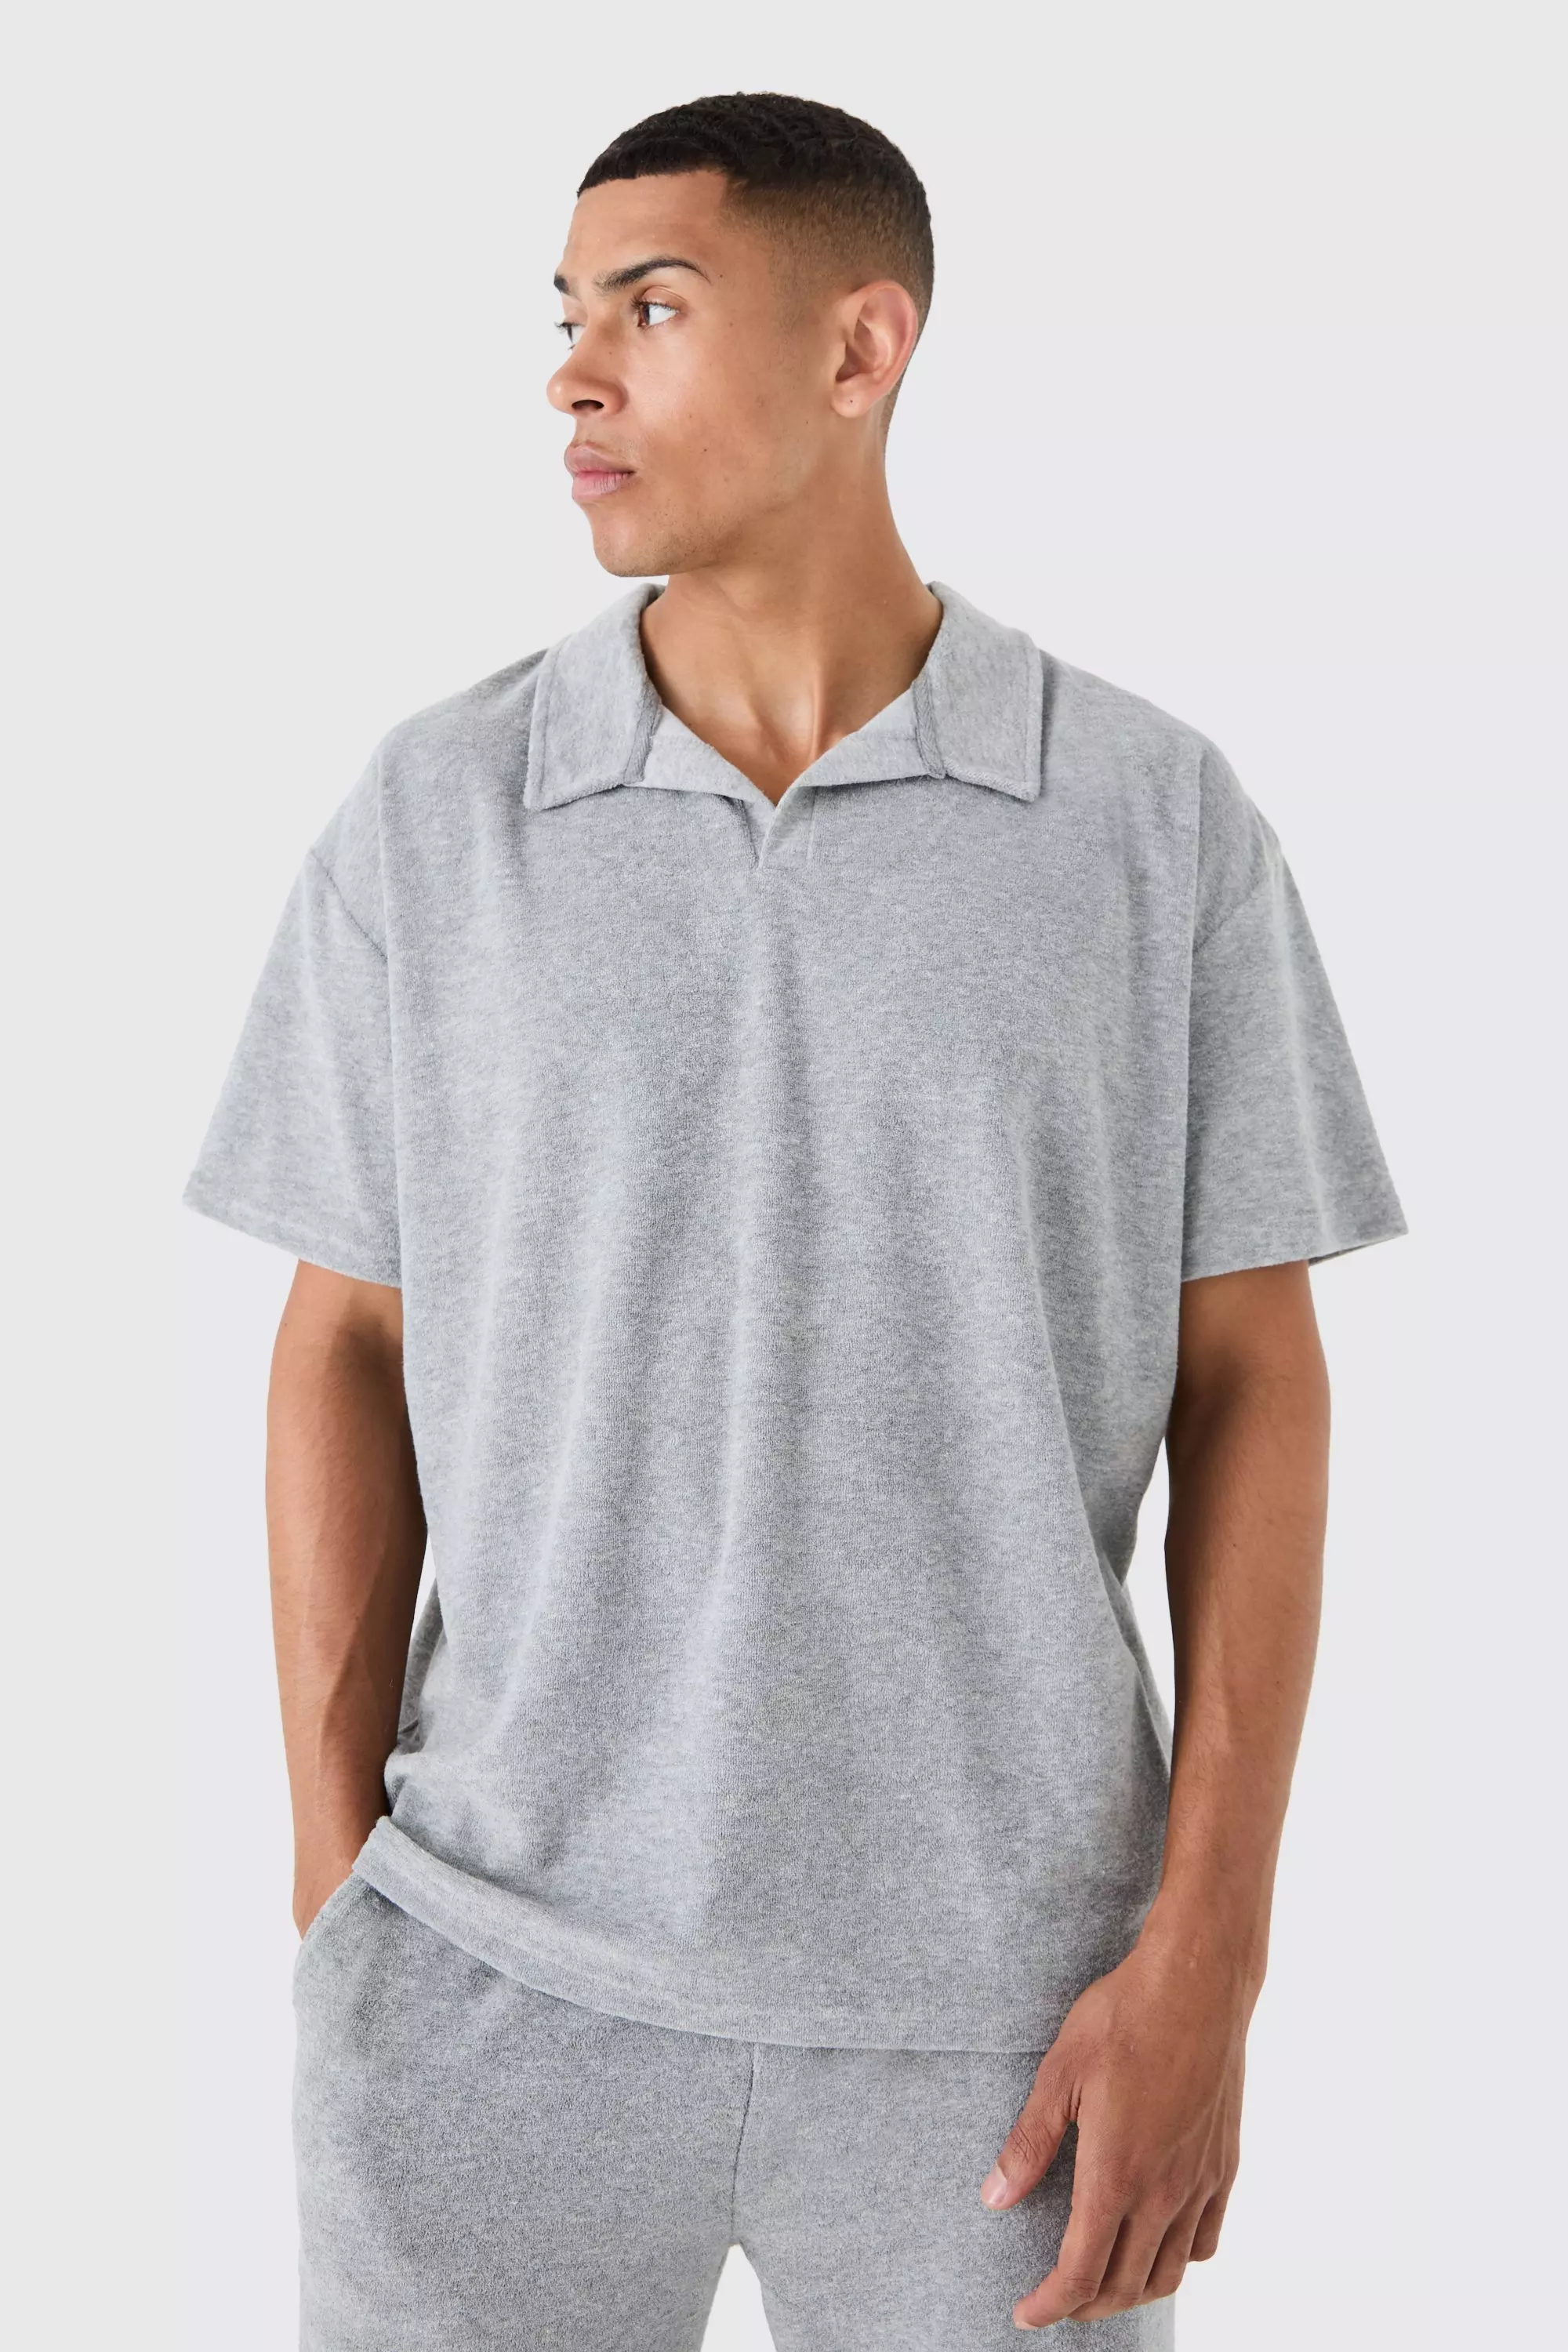 Oversized Revere Towelling Polo Grey marl